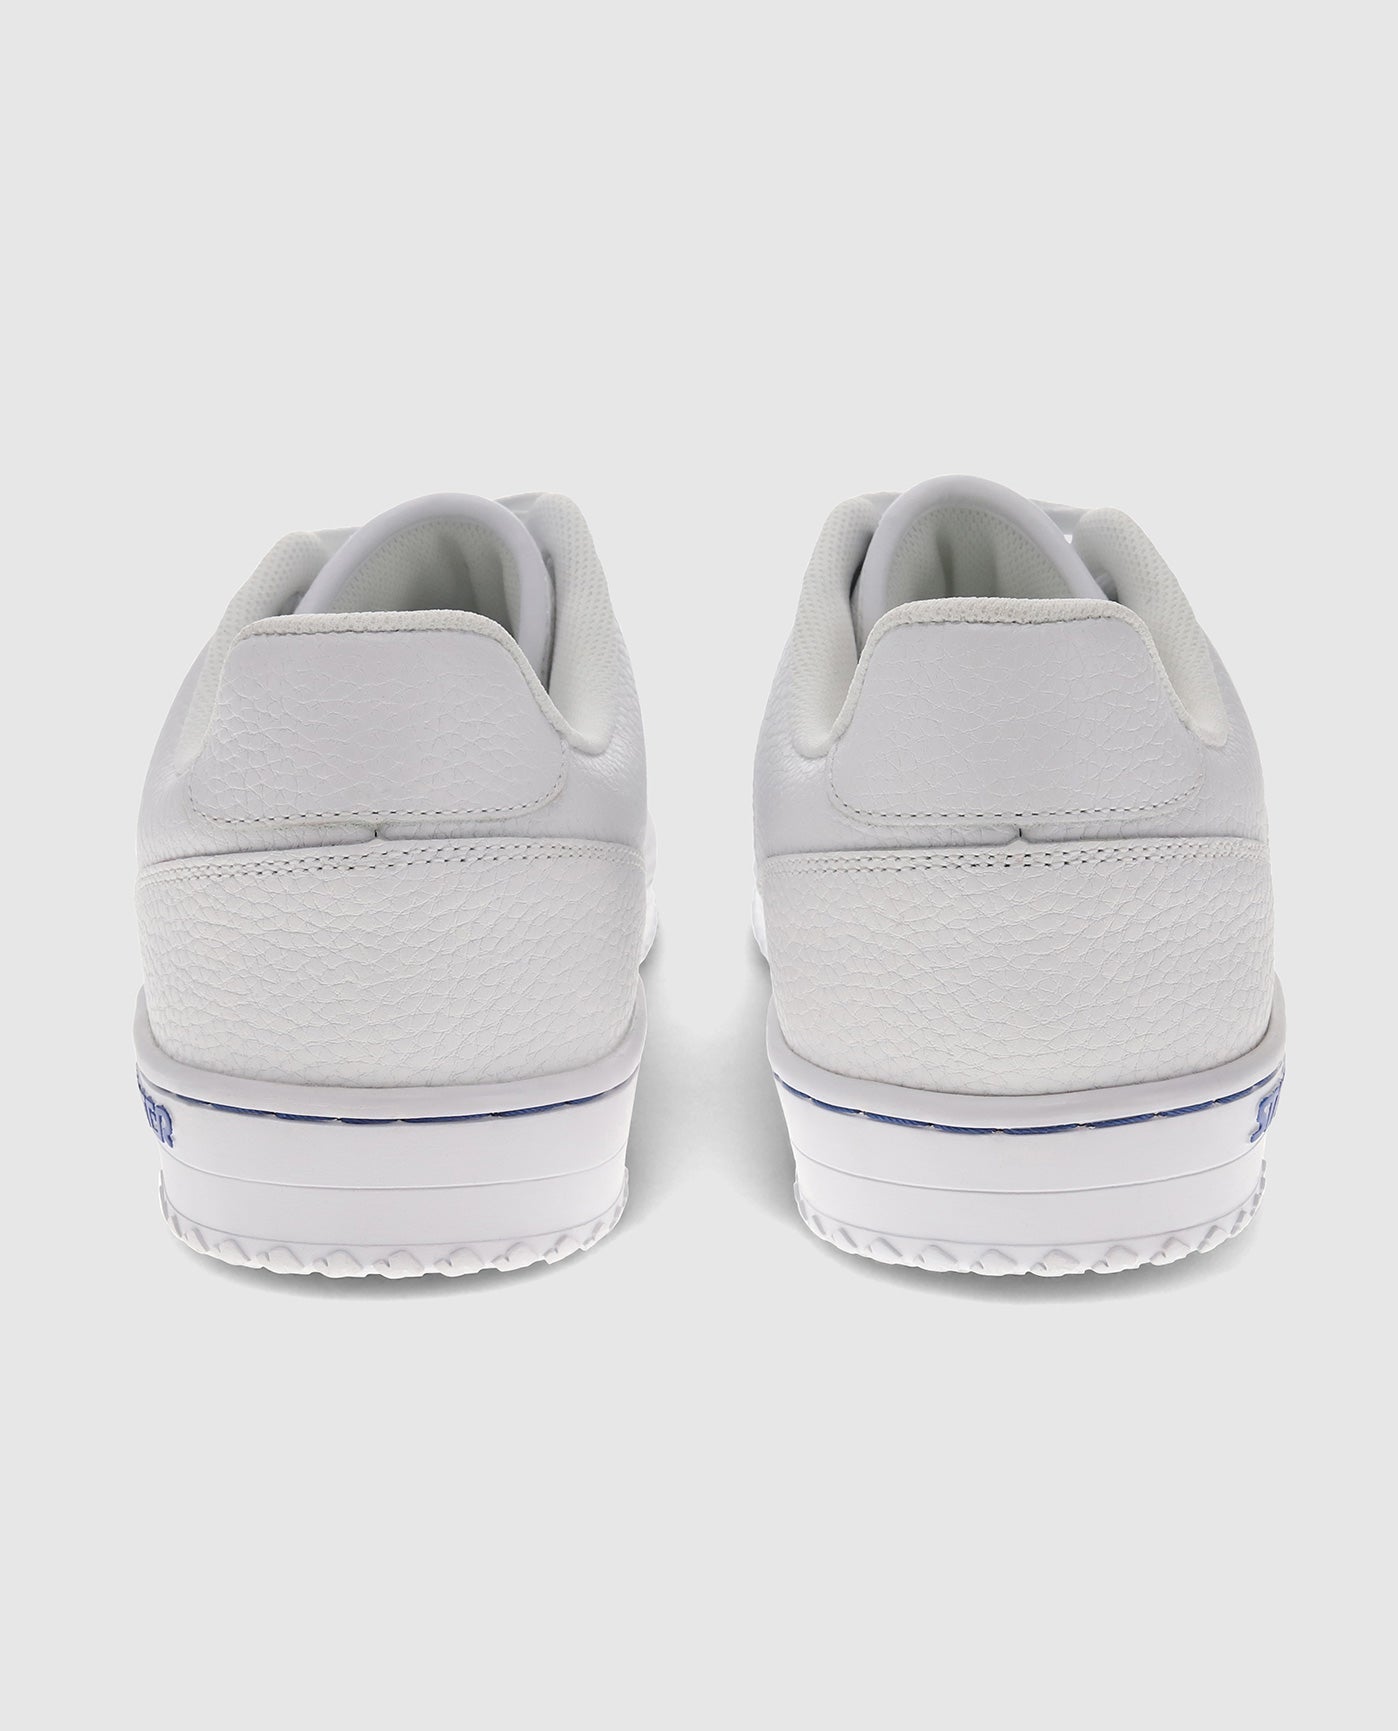 Back of Blue and White Starter LFS 1 Sneakers | Blue White